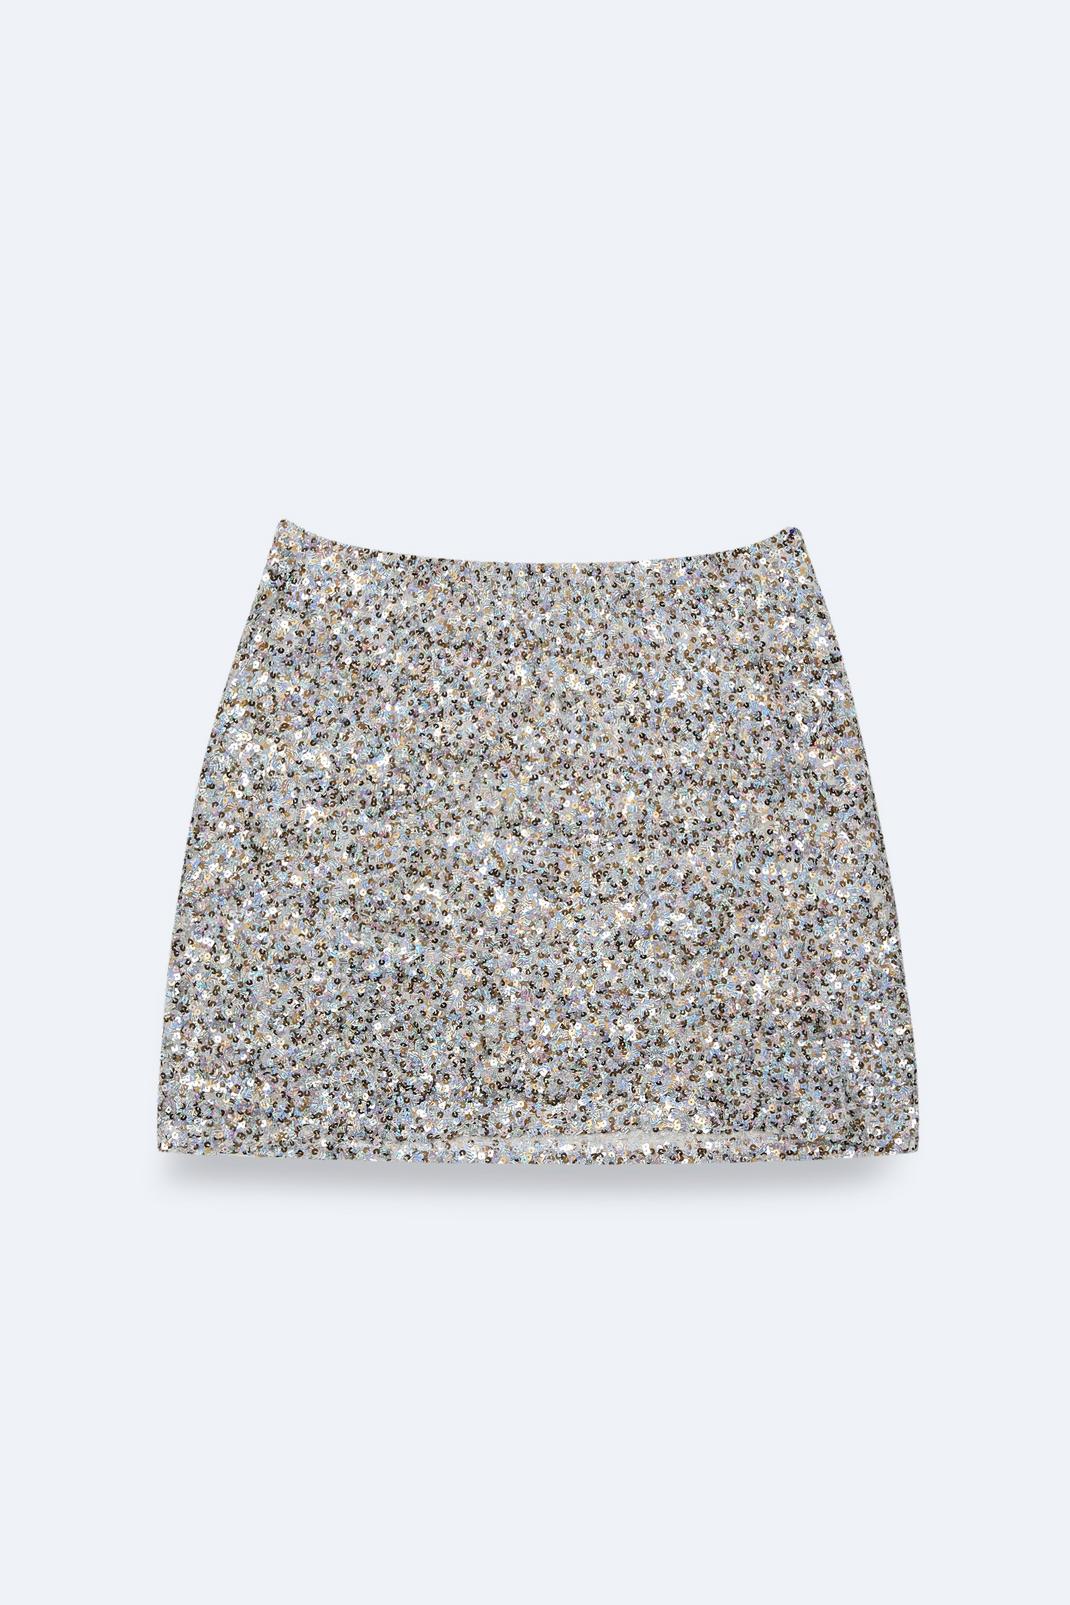 Silver Plus Size Metallic Textured Mixed Sequin Mini Skirt image number 1